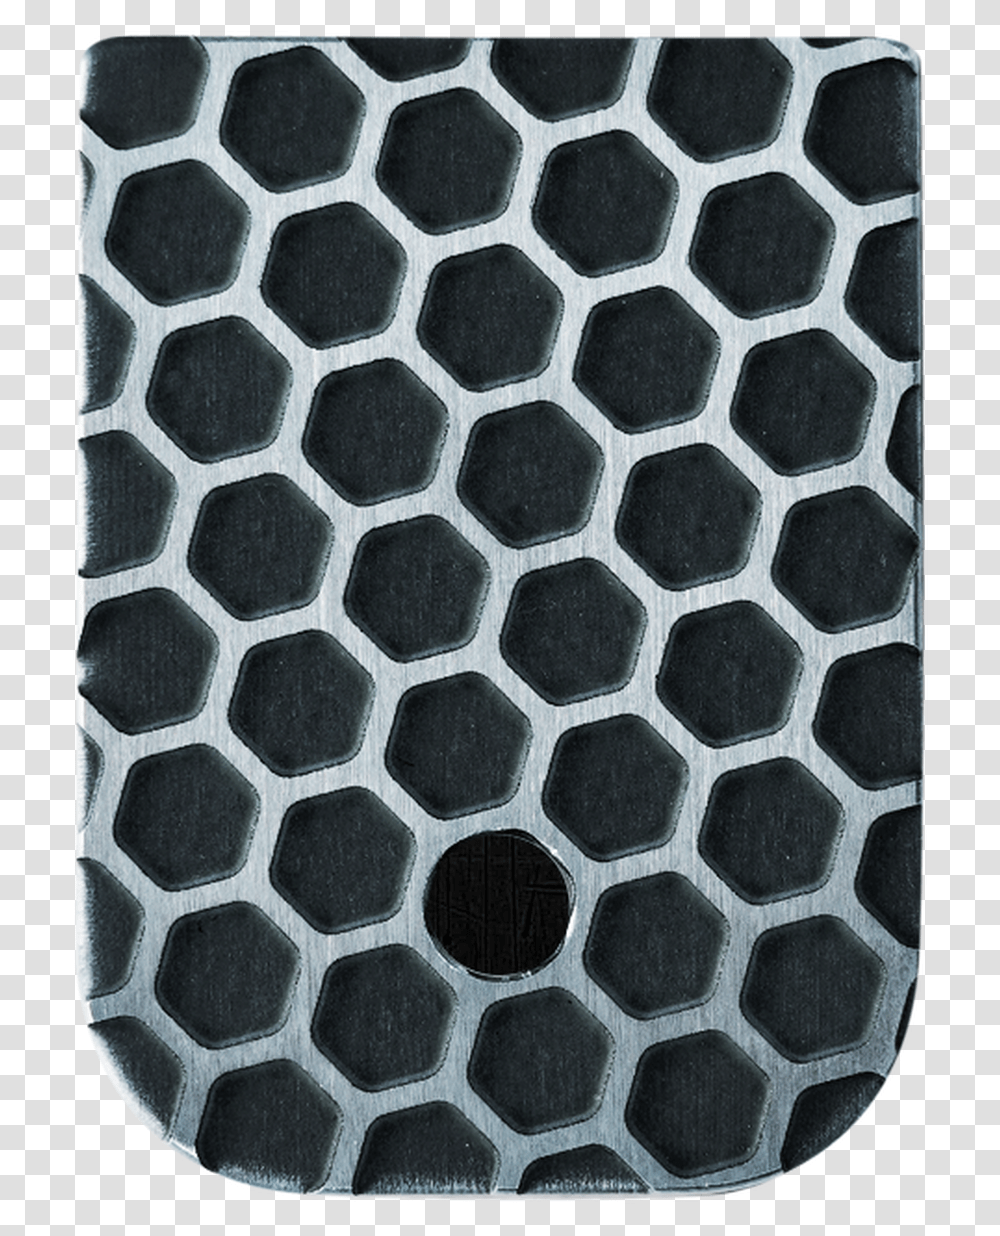 Honeycomb Stainless Steel Finish Mag Plate Michael Kors Av, Food, Rug, Texture, Hole Transparent Png